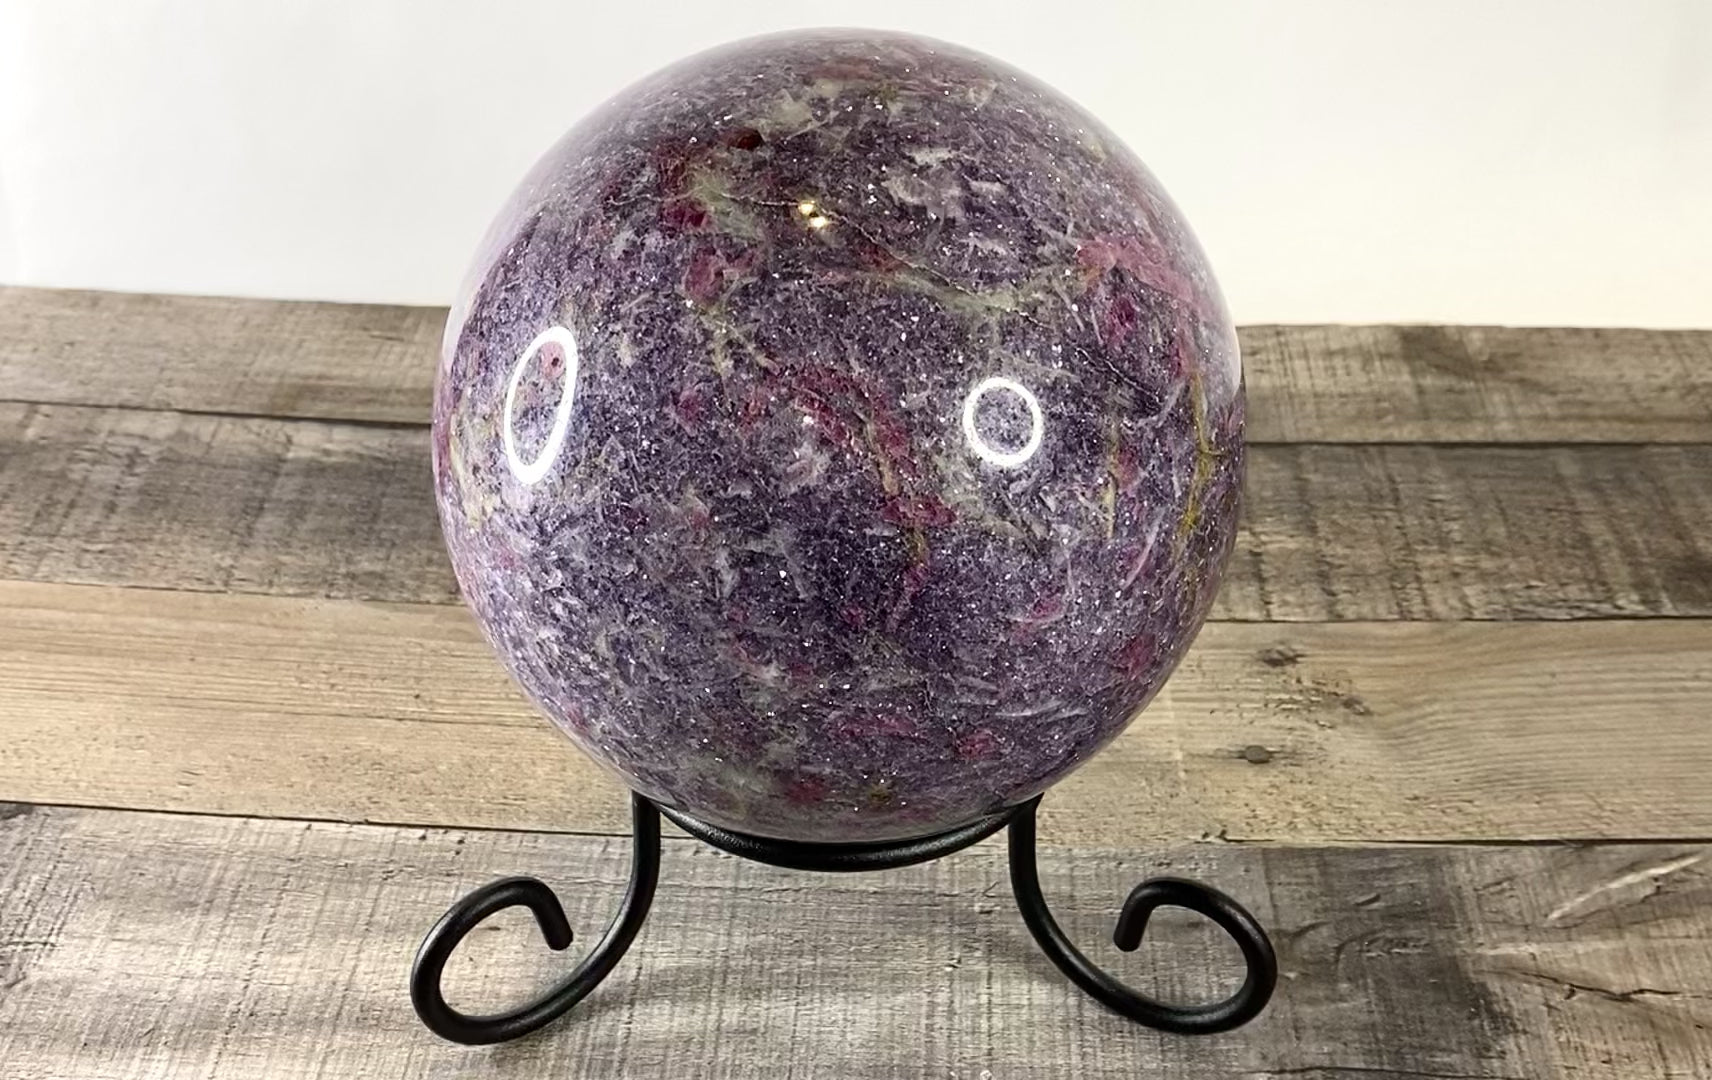 Large 10+ pound, 6" Sparkly Unicorn Stone Sphere sitting on its included metal stand - Video